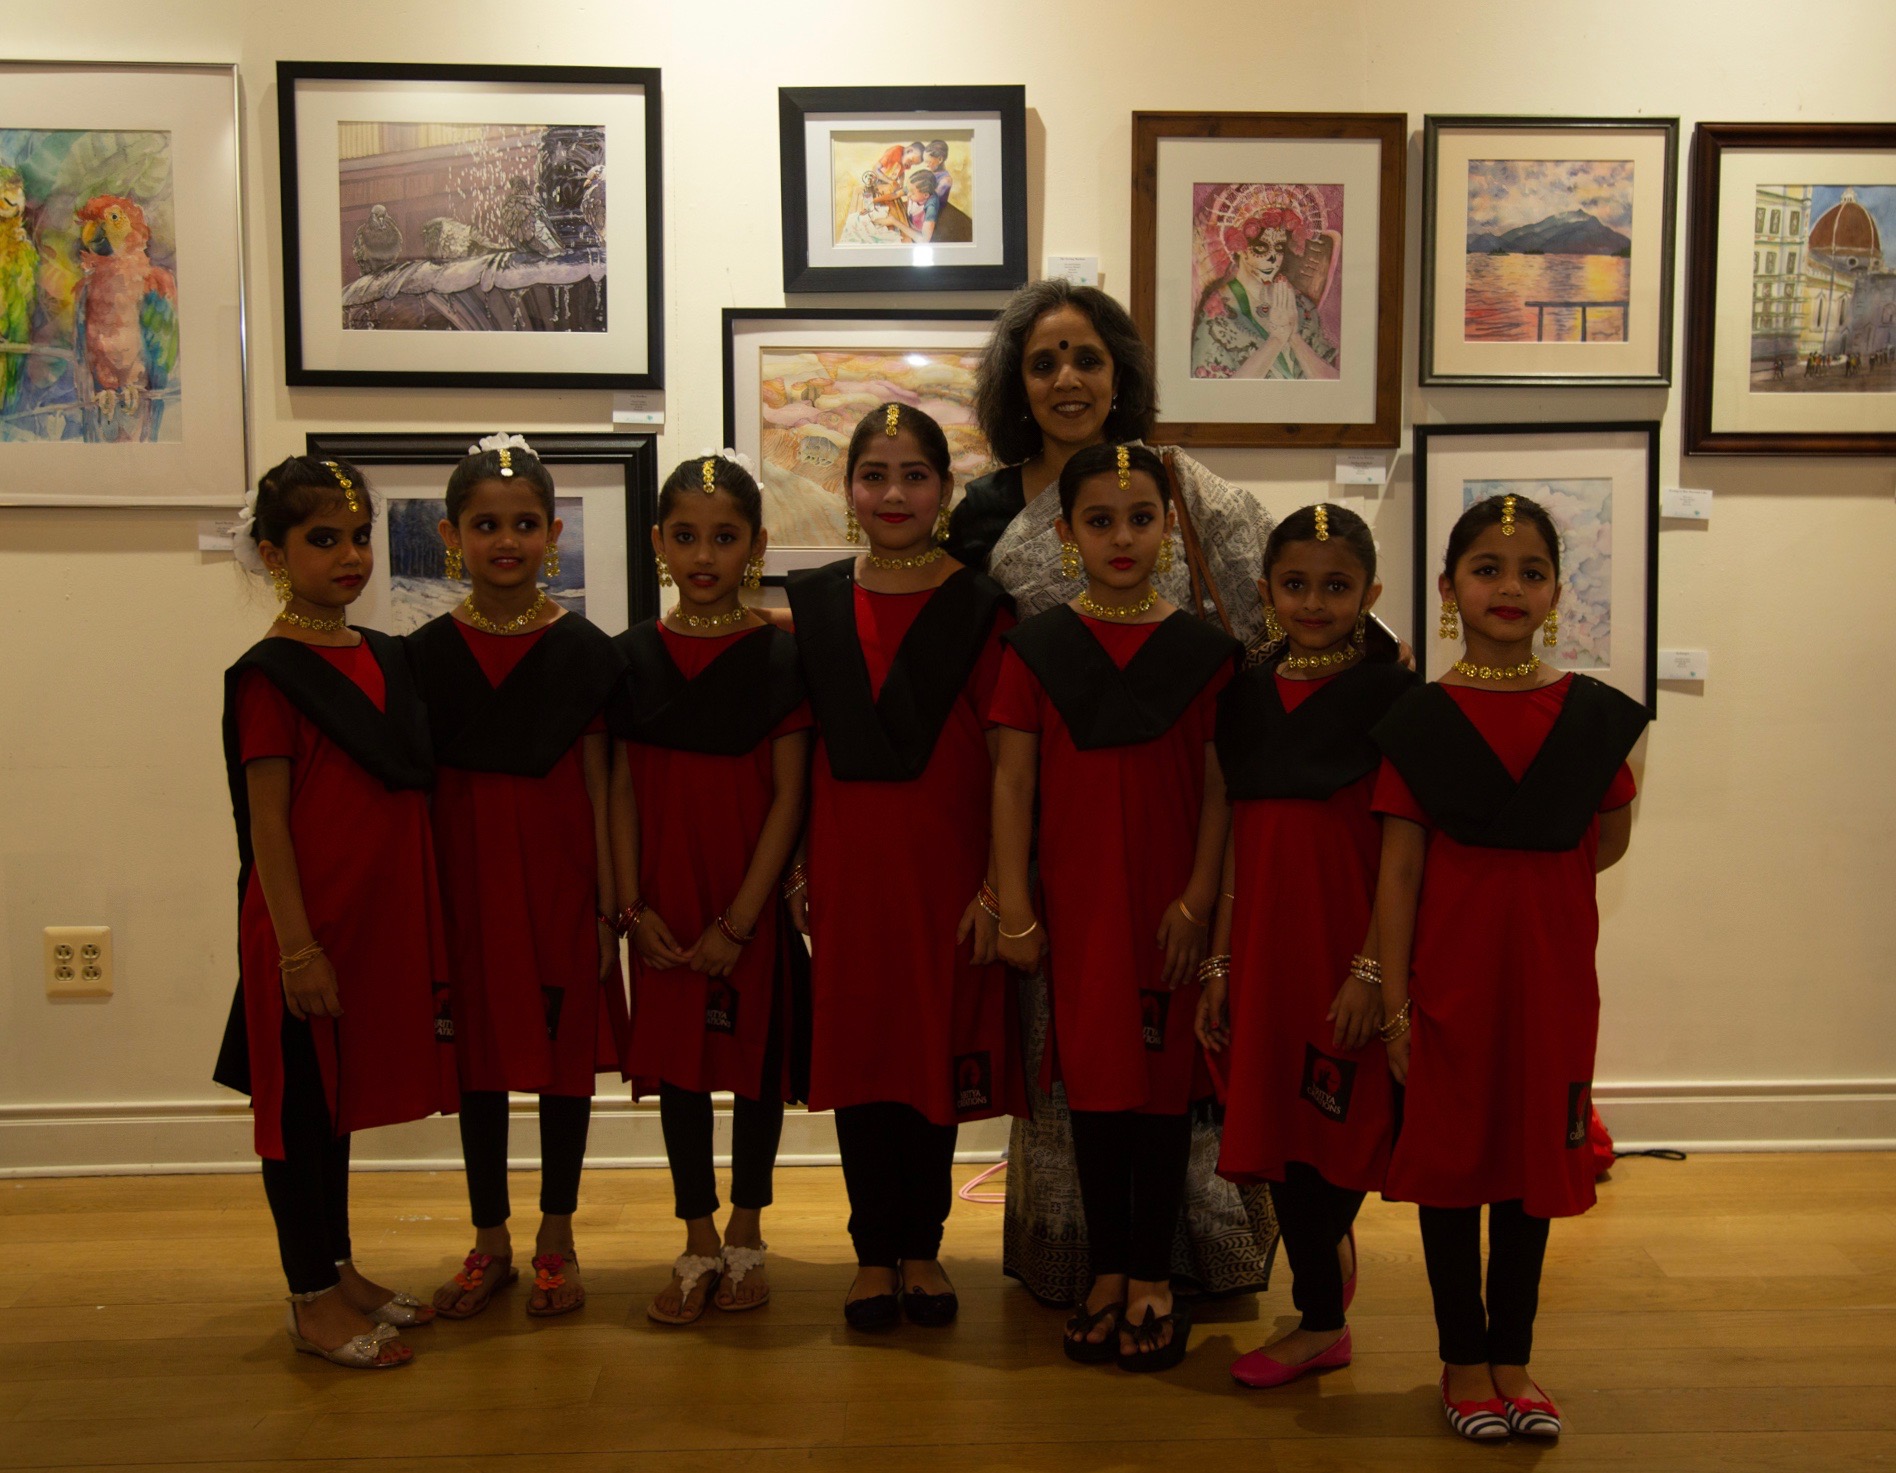 Diditi Mitra in group photo with students, Nritya Creations Academy of Dance annual show